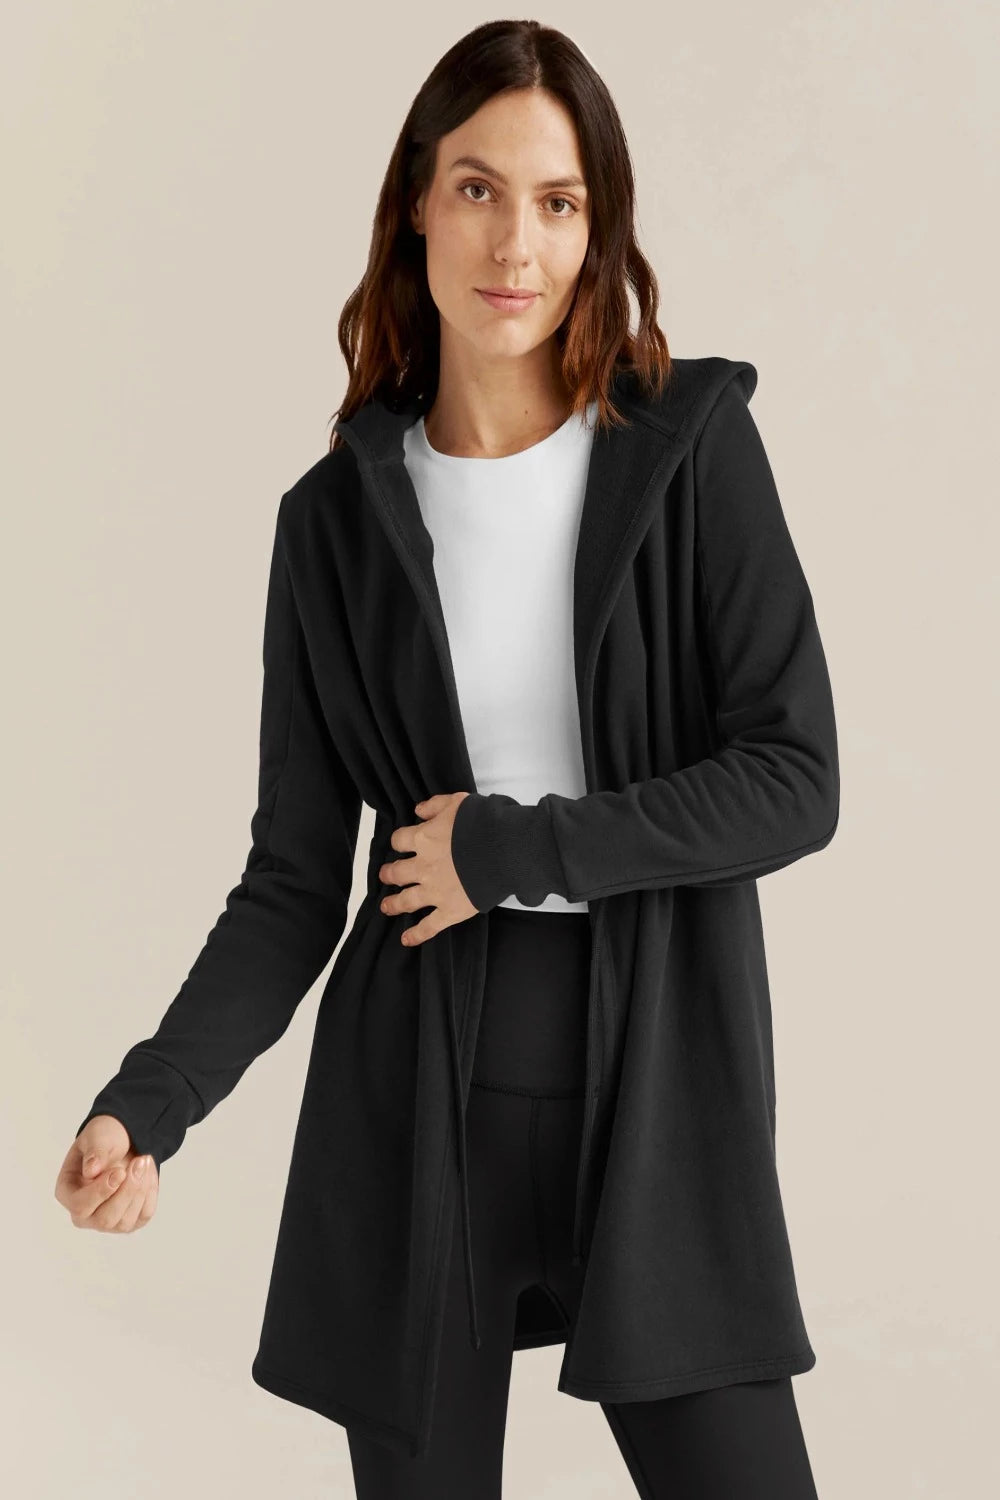 On the Go Jacket in Black